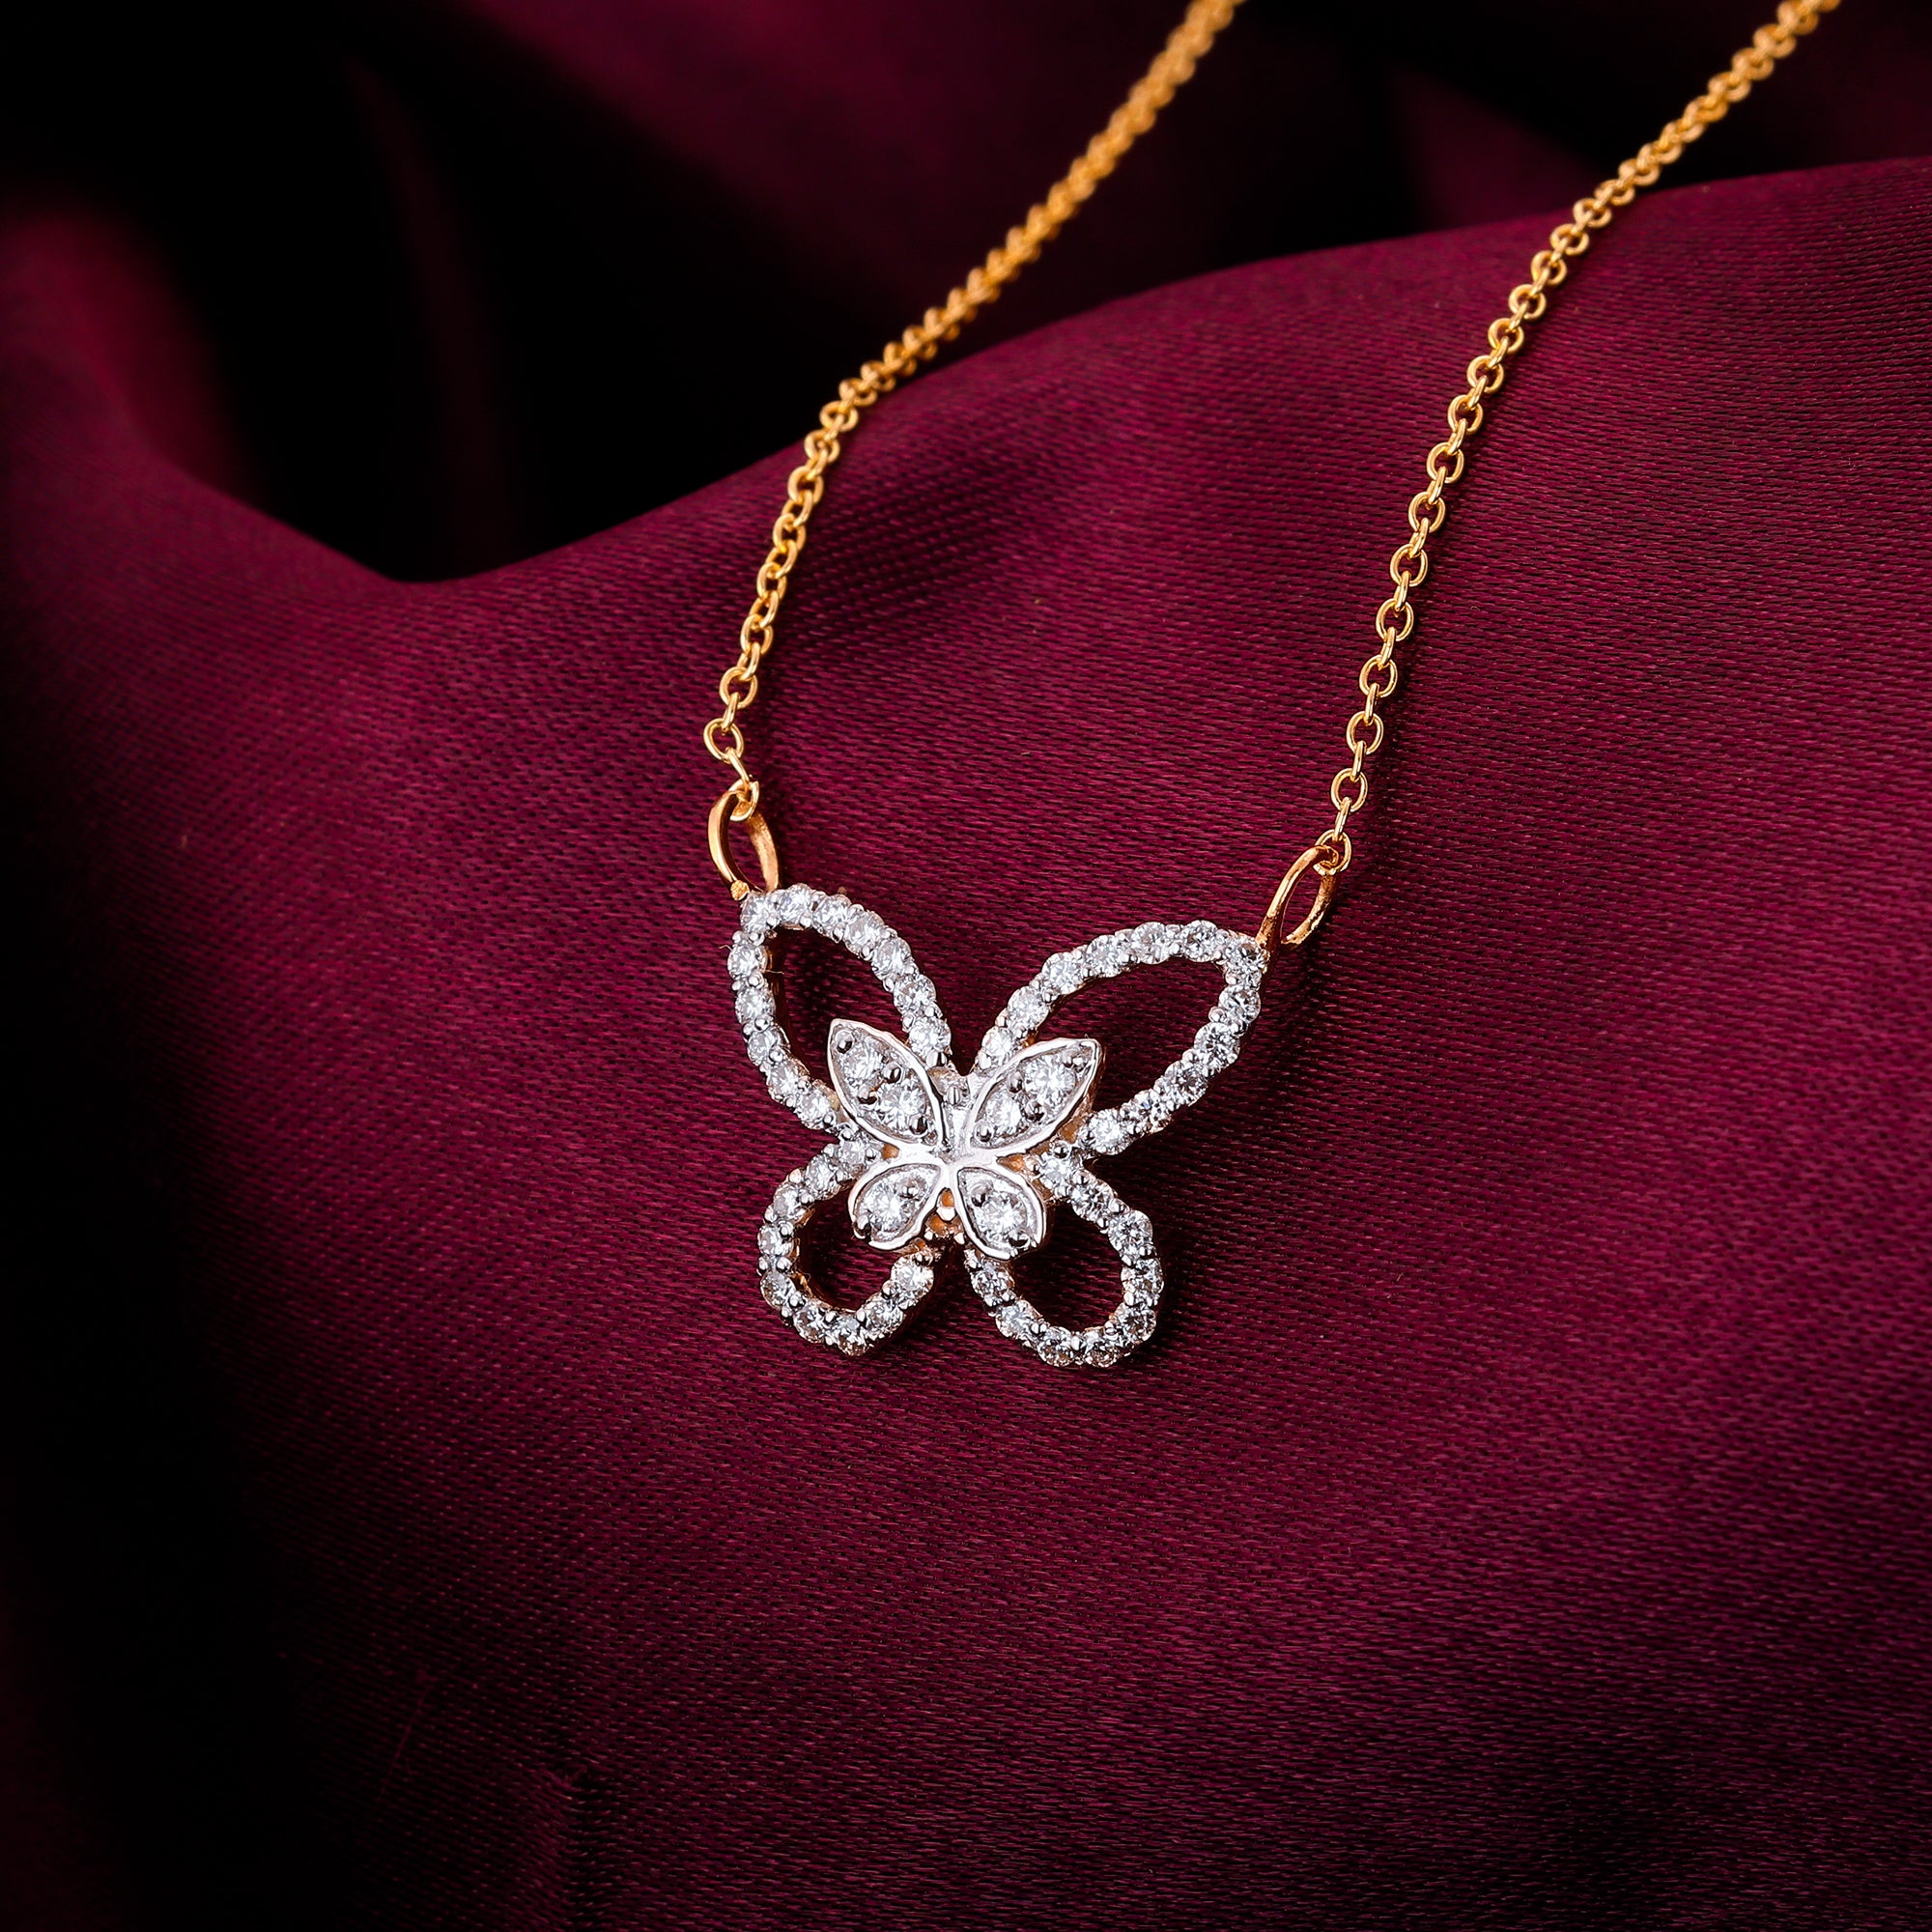 Diamond Butterfly Necklace Available For Immediate Sale At Sotheby's